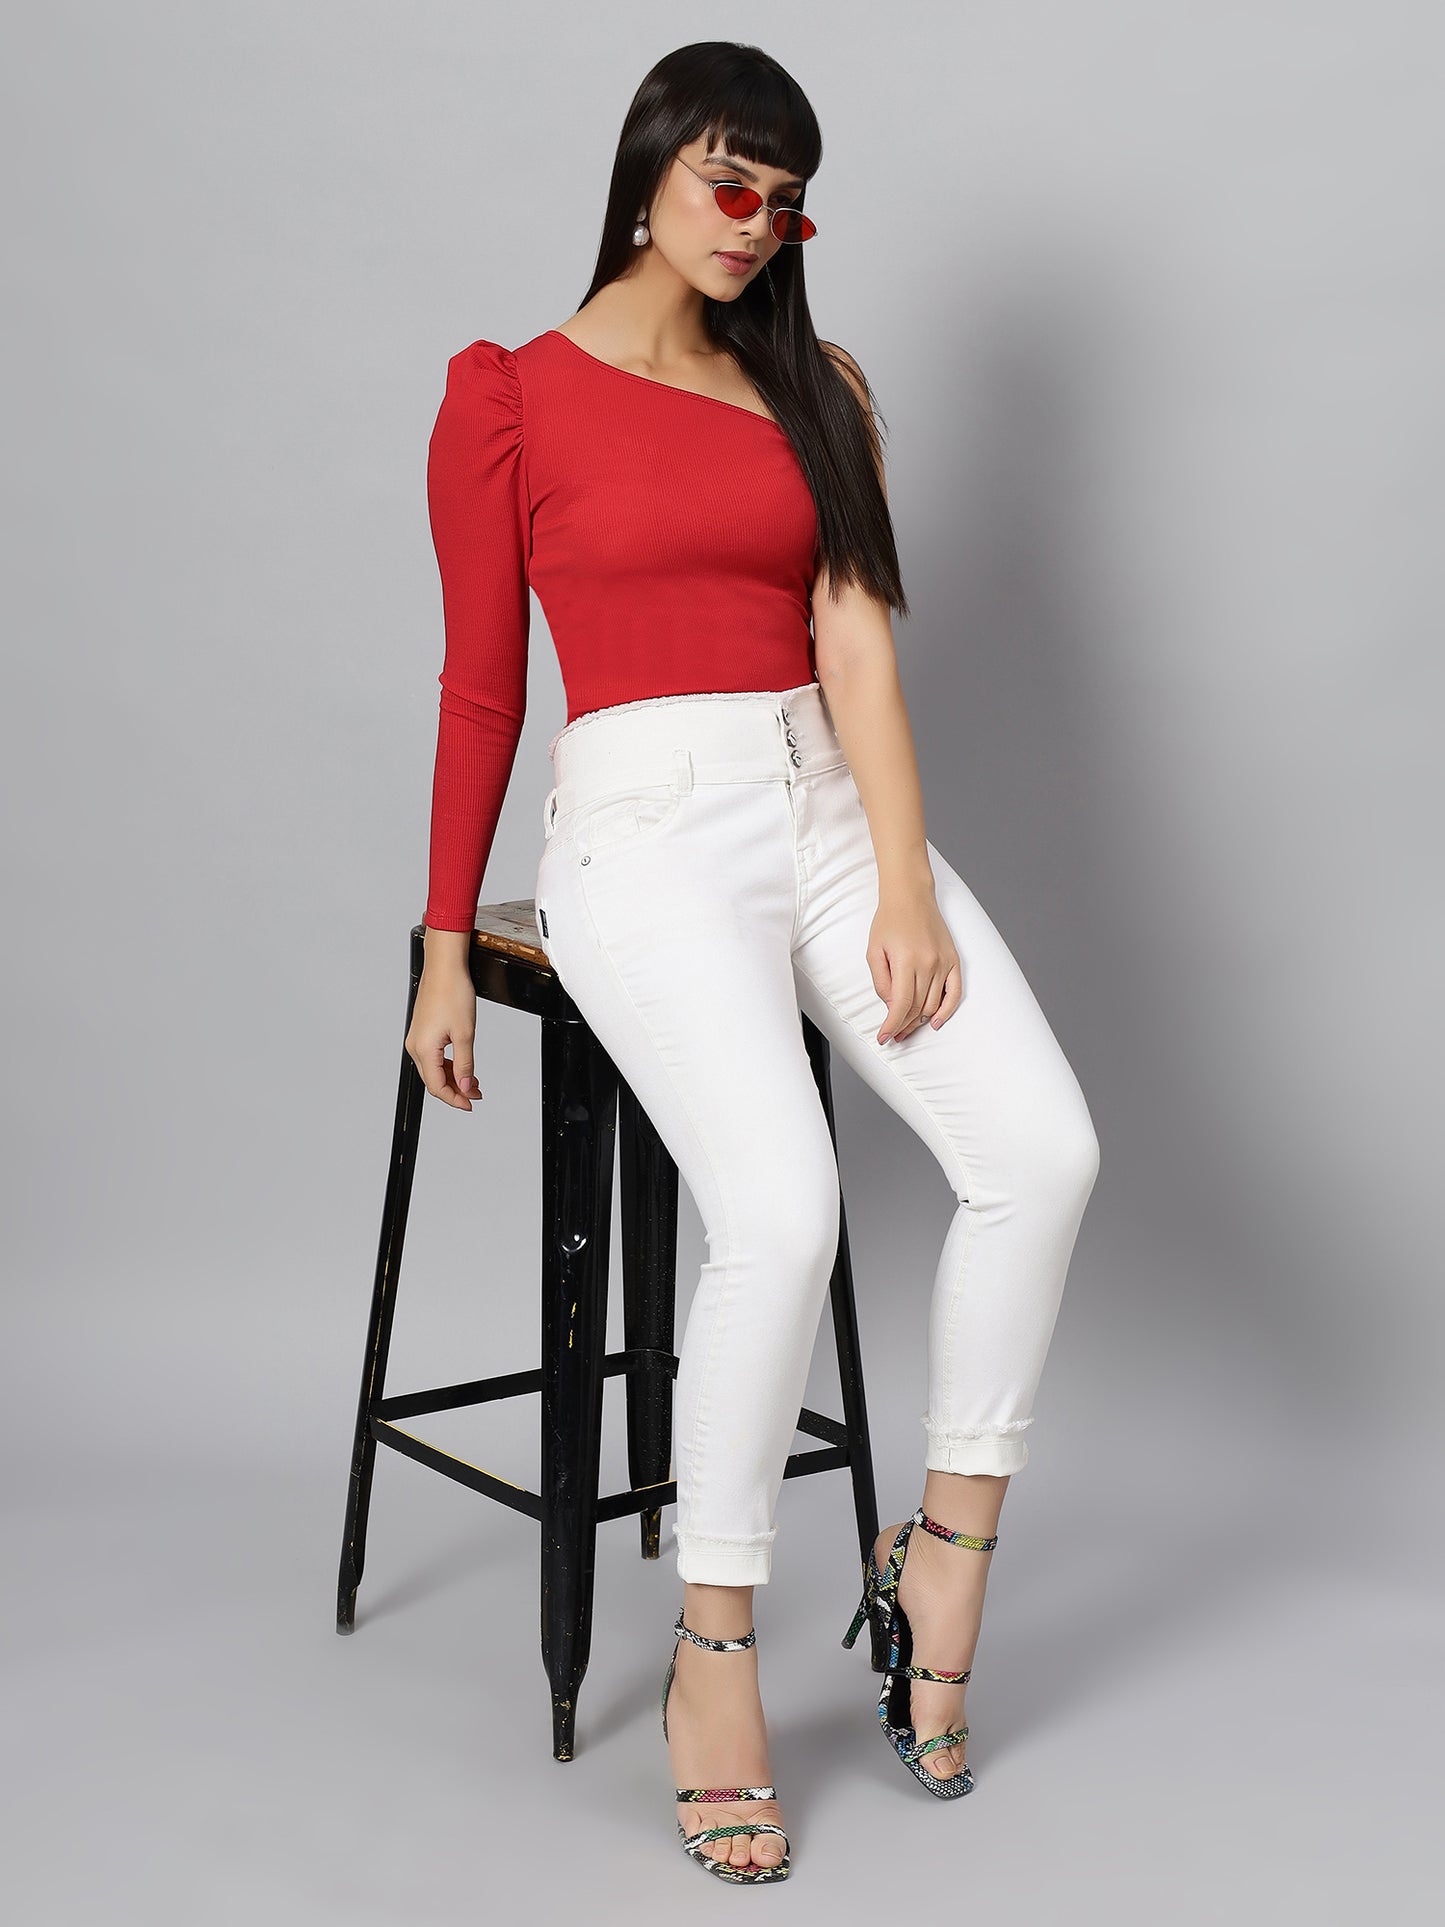 Red Elegant One Shoulder Cut Out Long Puff Sleeves Top